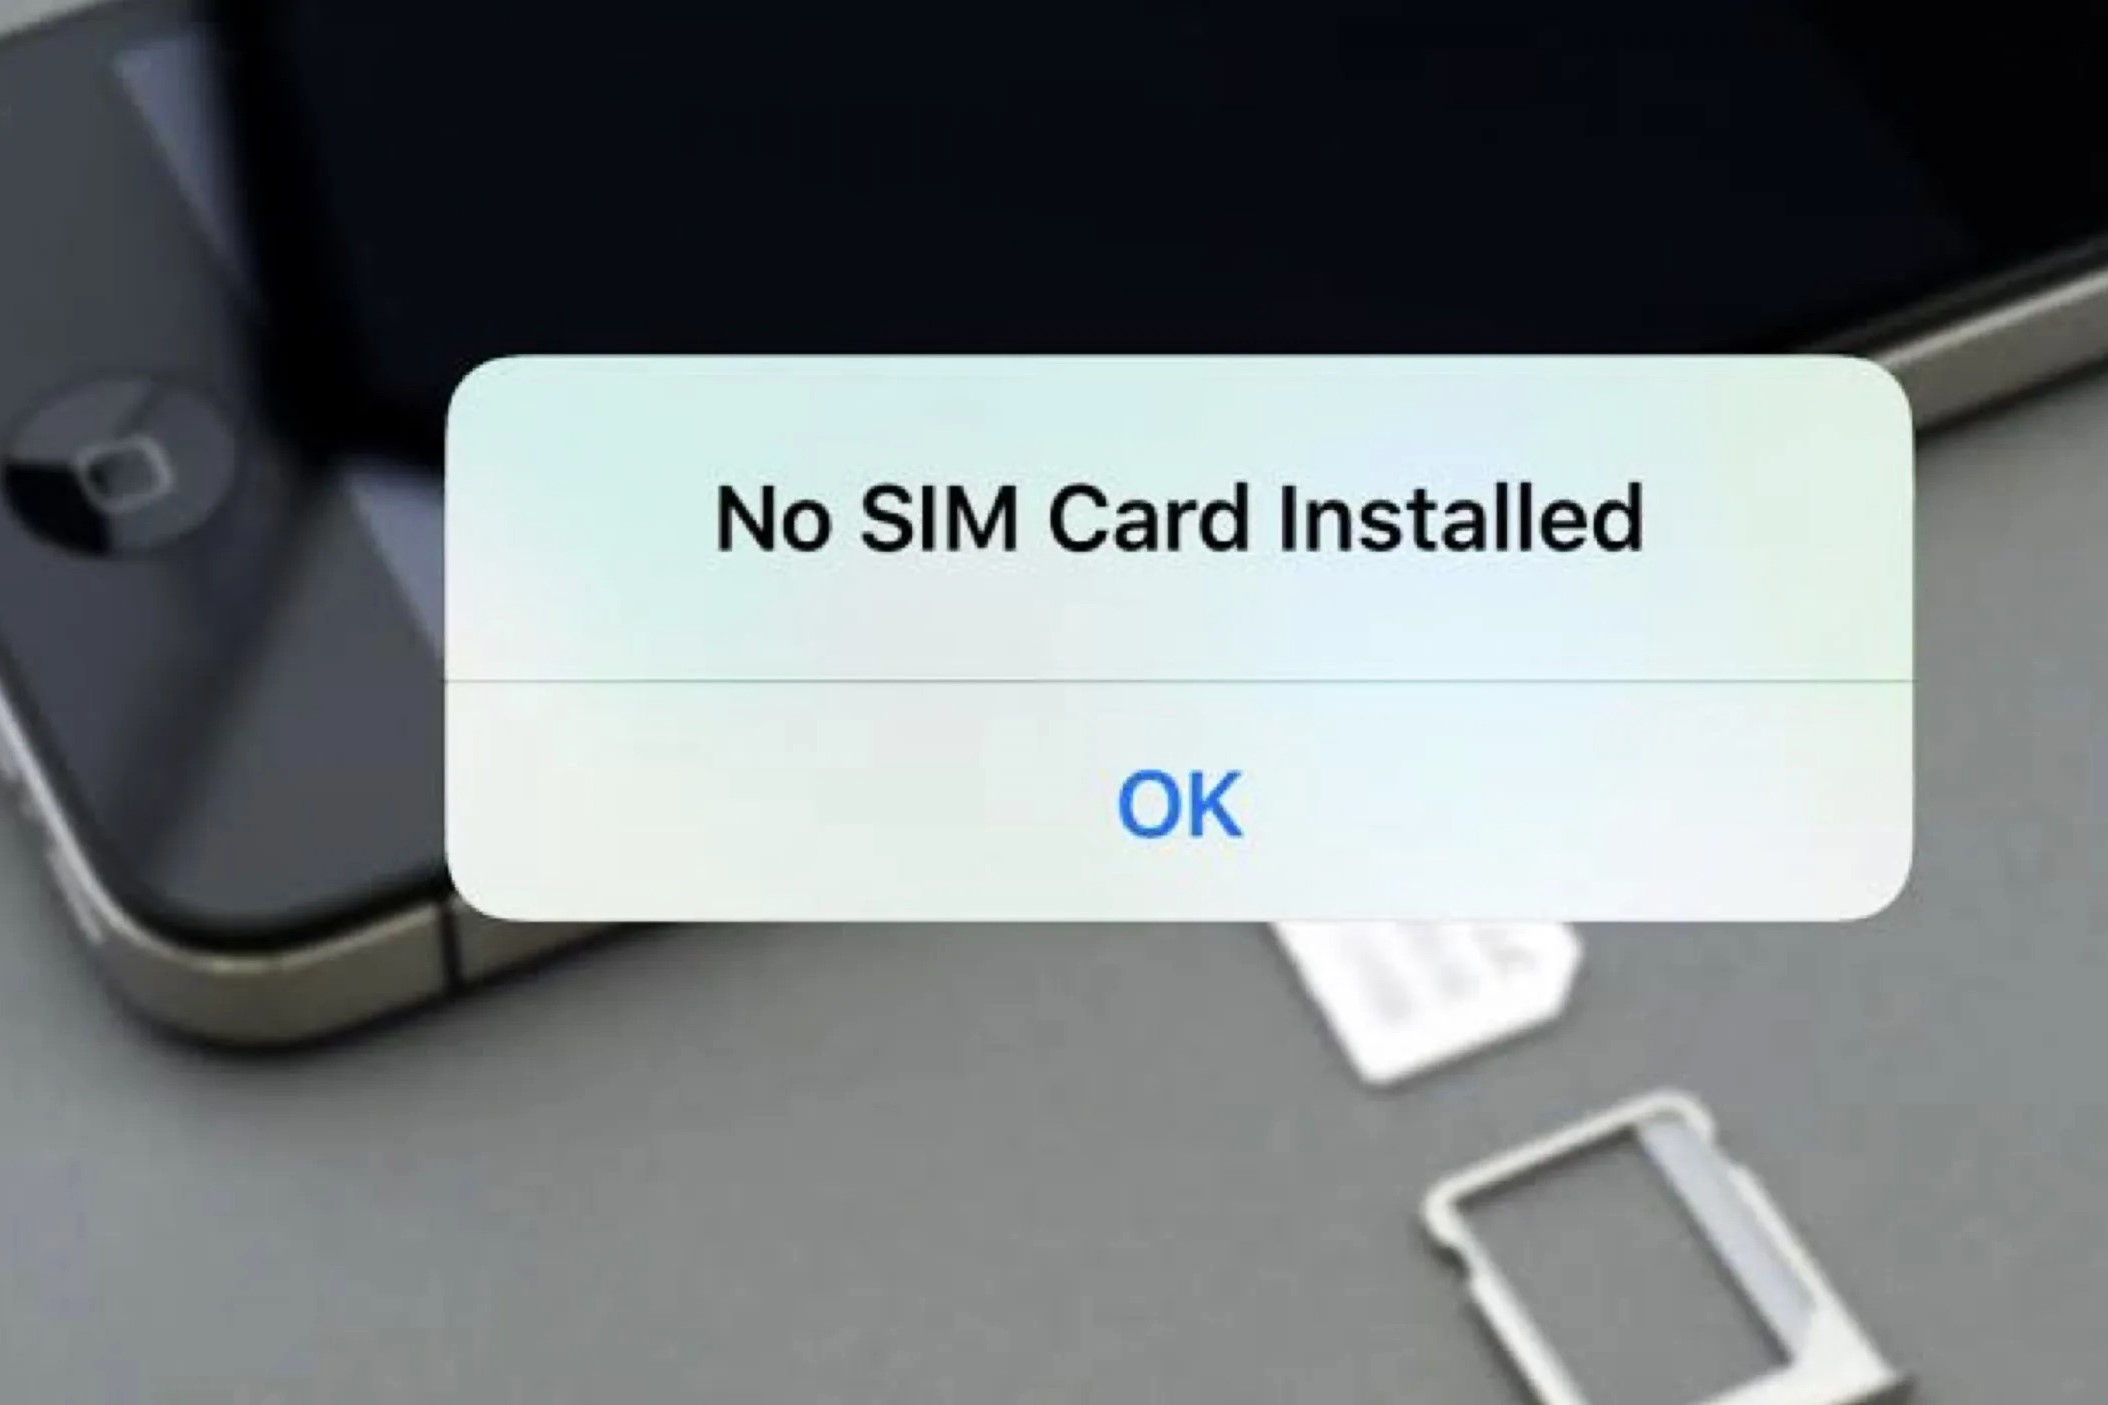 Troubleshooting SIM Card Issues On A New Phone